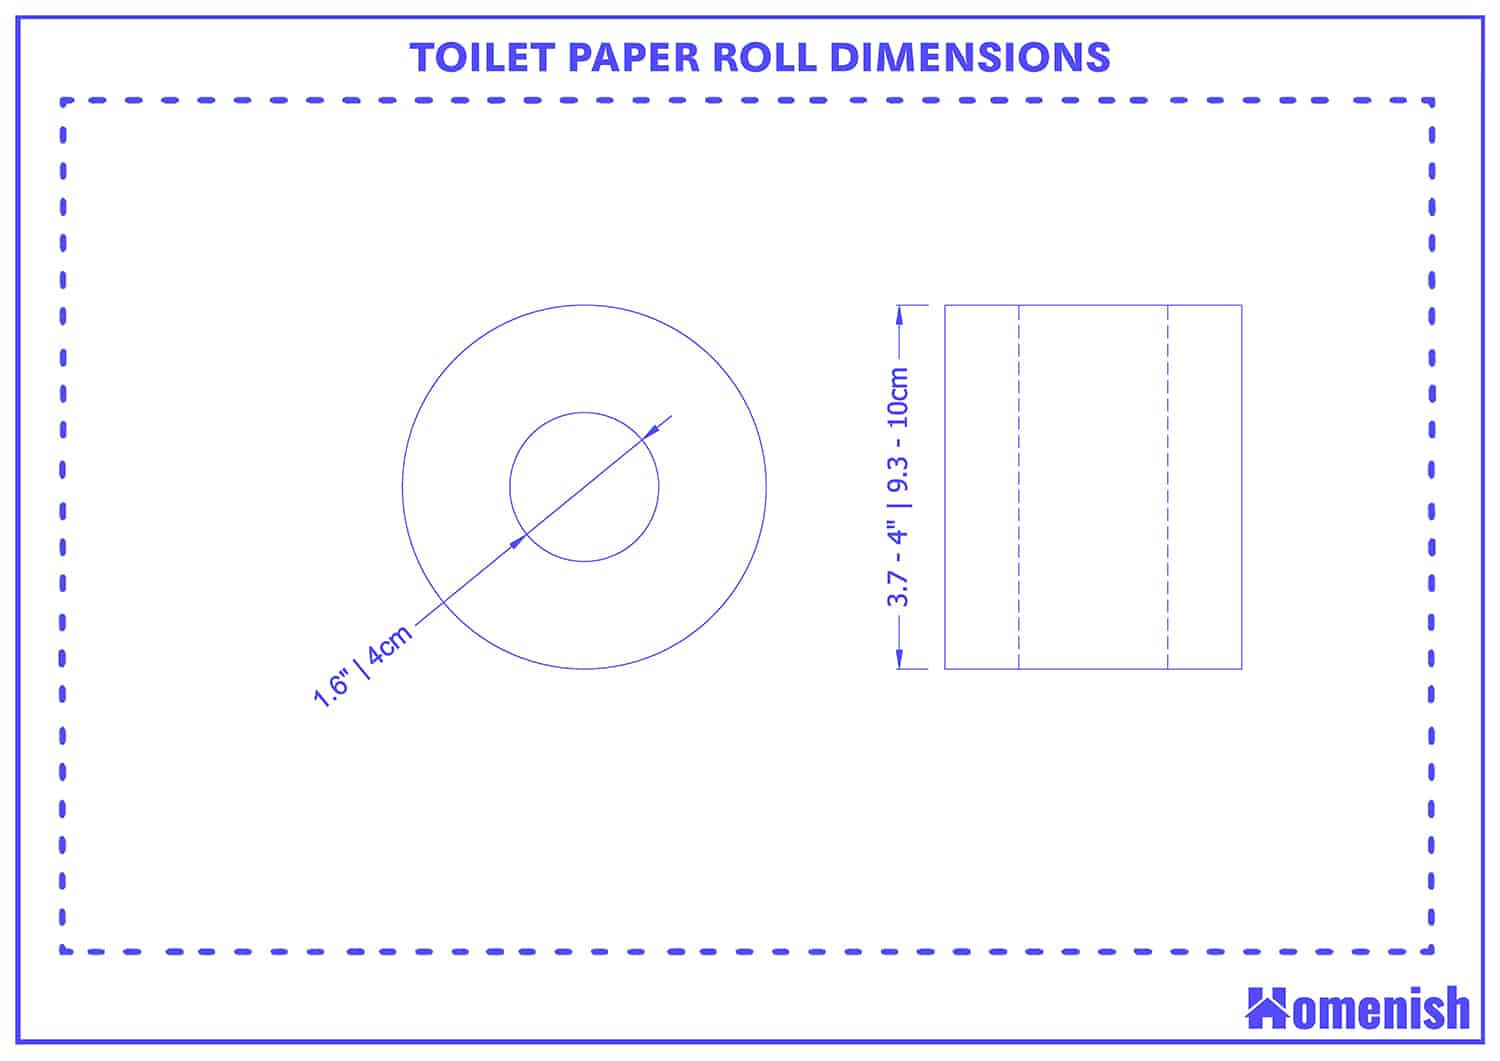 Toilet Paper Roll Dimensions